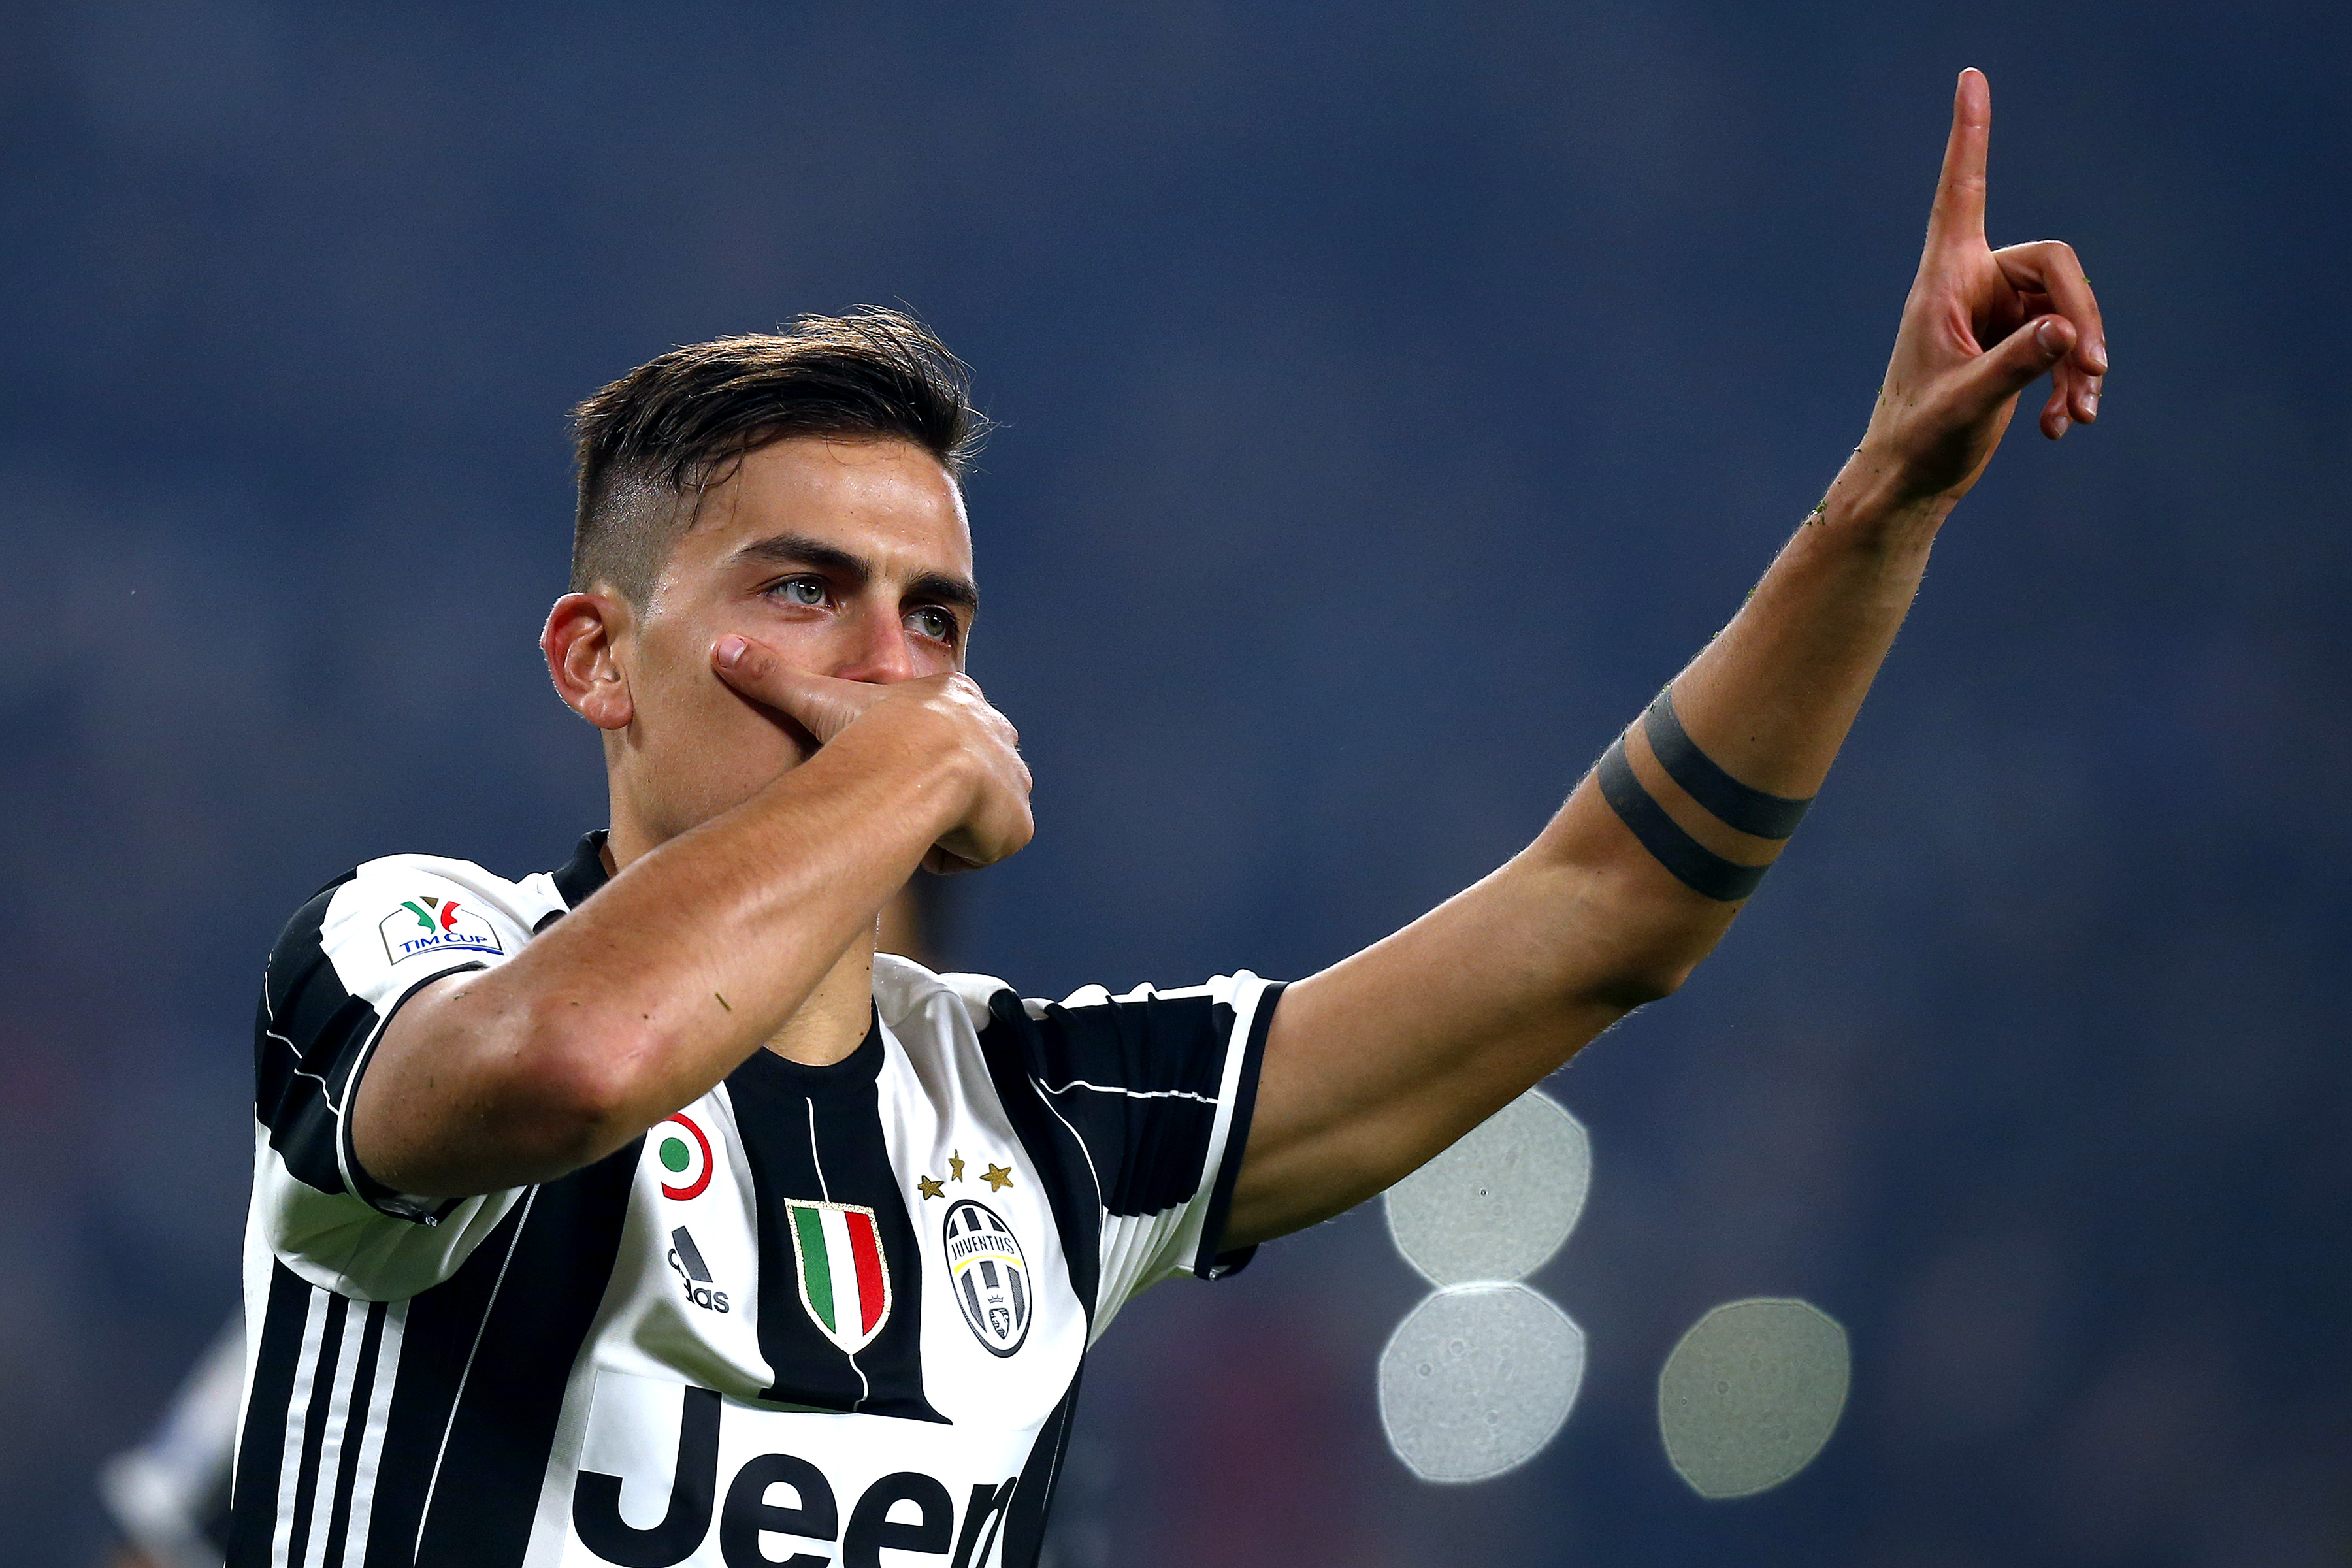 Juventus' forward Paulo Dybala from Argentina celebrates after scoring during the Italian Tim Cup football match between Juventus and Napoli on February 28, 2017, at the Juventus Stadium in Turin. / AFP / Marco BERTORELLO        (Photo credit should read MARCO BERTORELLO/AFP/Getty Images)